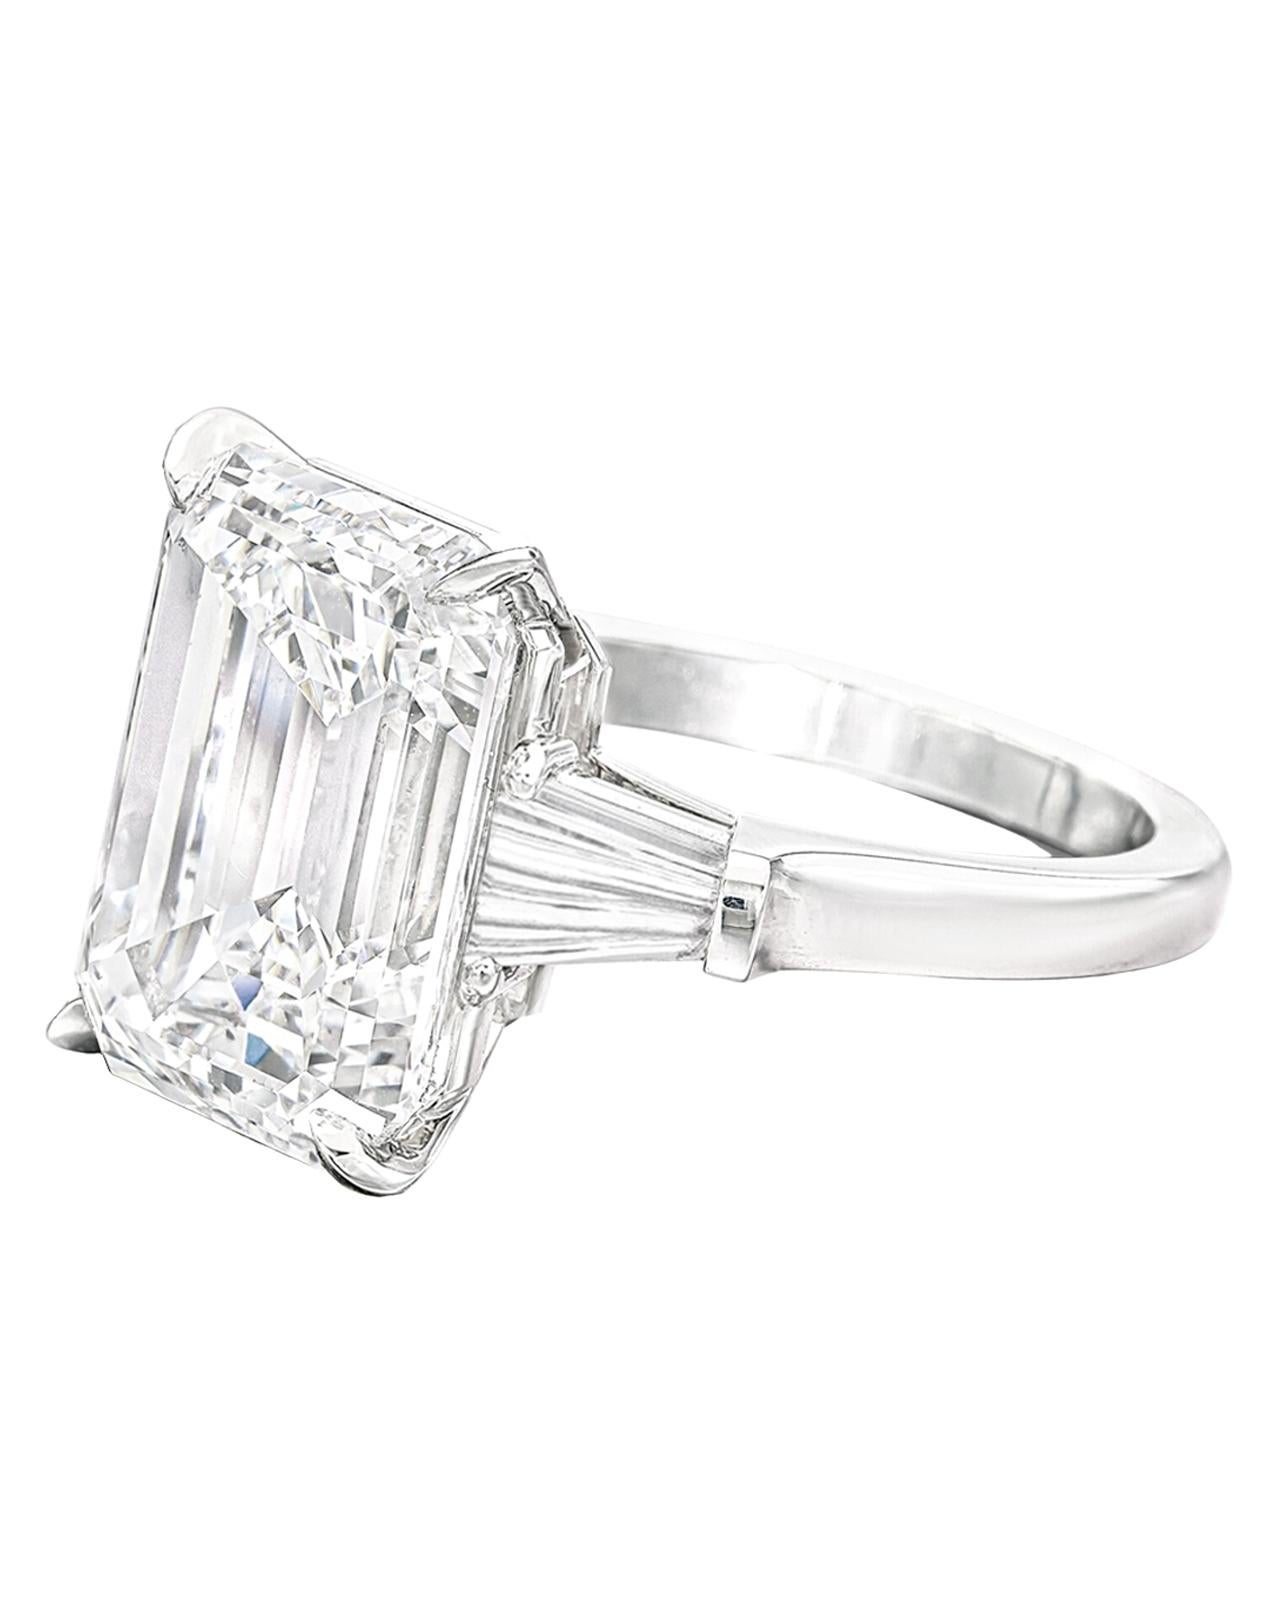 Exceptional GIA Certified 8 Carat Flawless Emerald Cut Diamond Ring In New Condition For Sale In Rome, IT